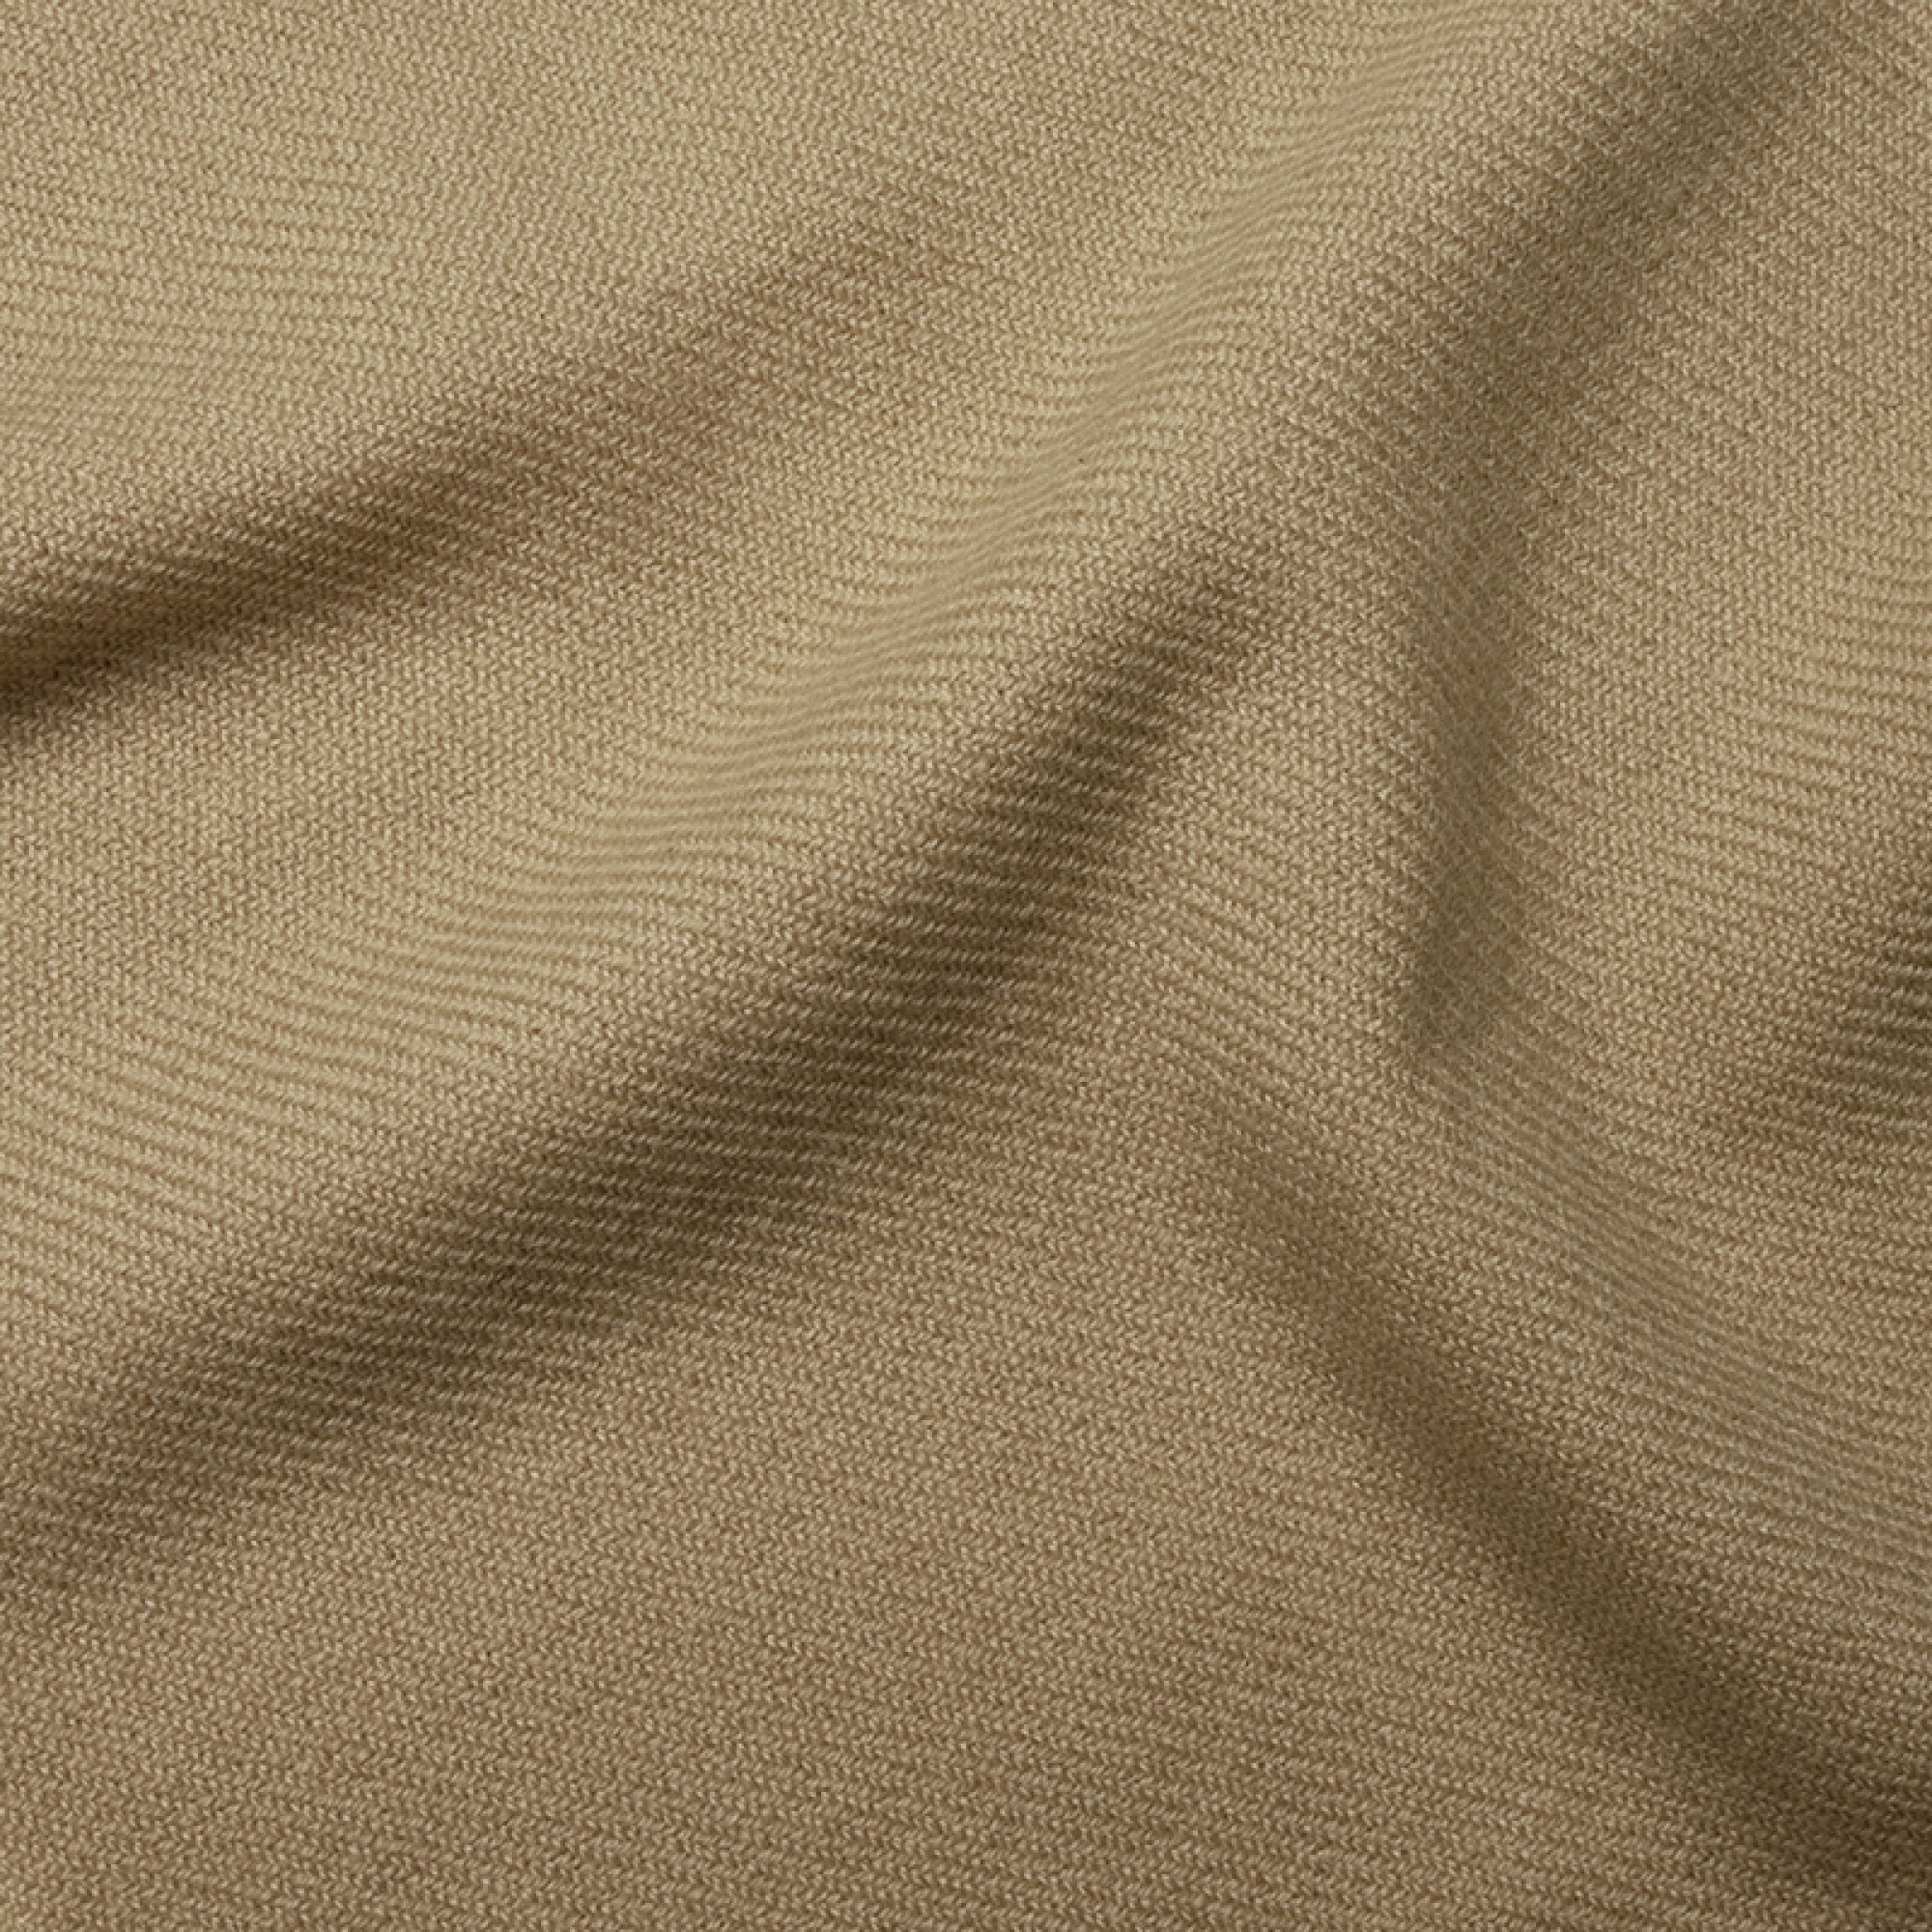 Cashmere accessories exclusive toodoo plain s 140 x 200 fawn 140 x 200 cm